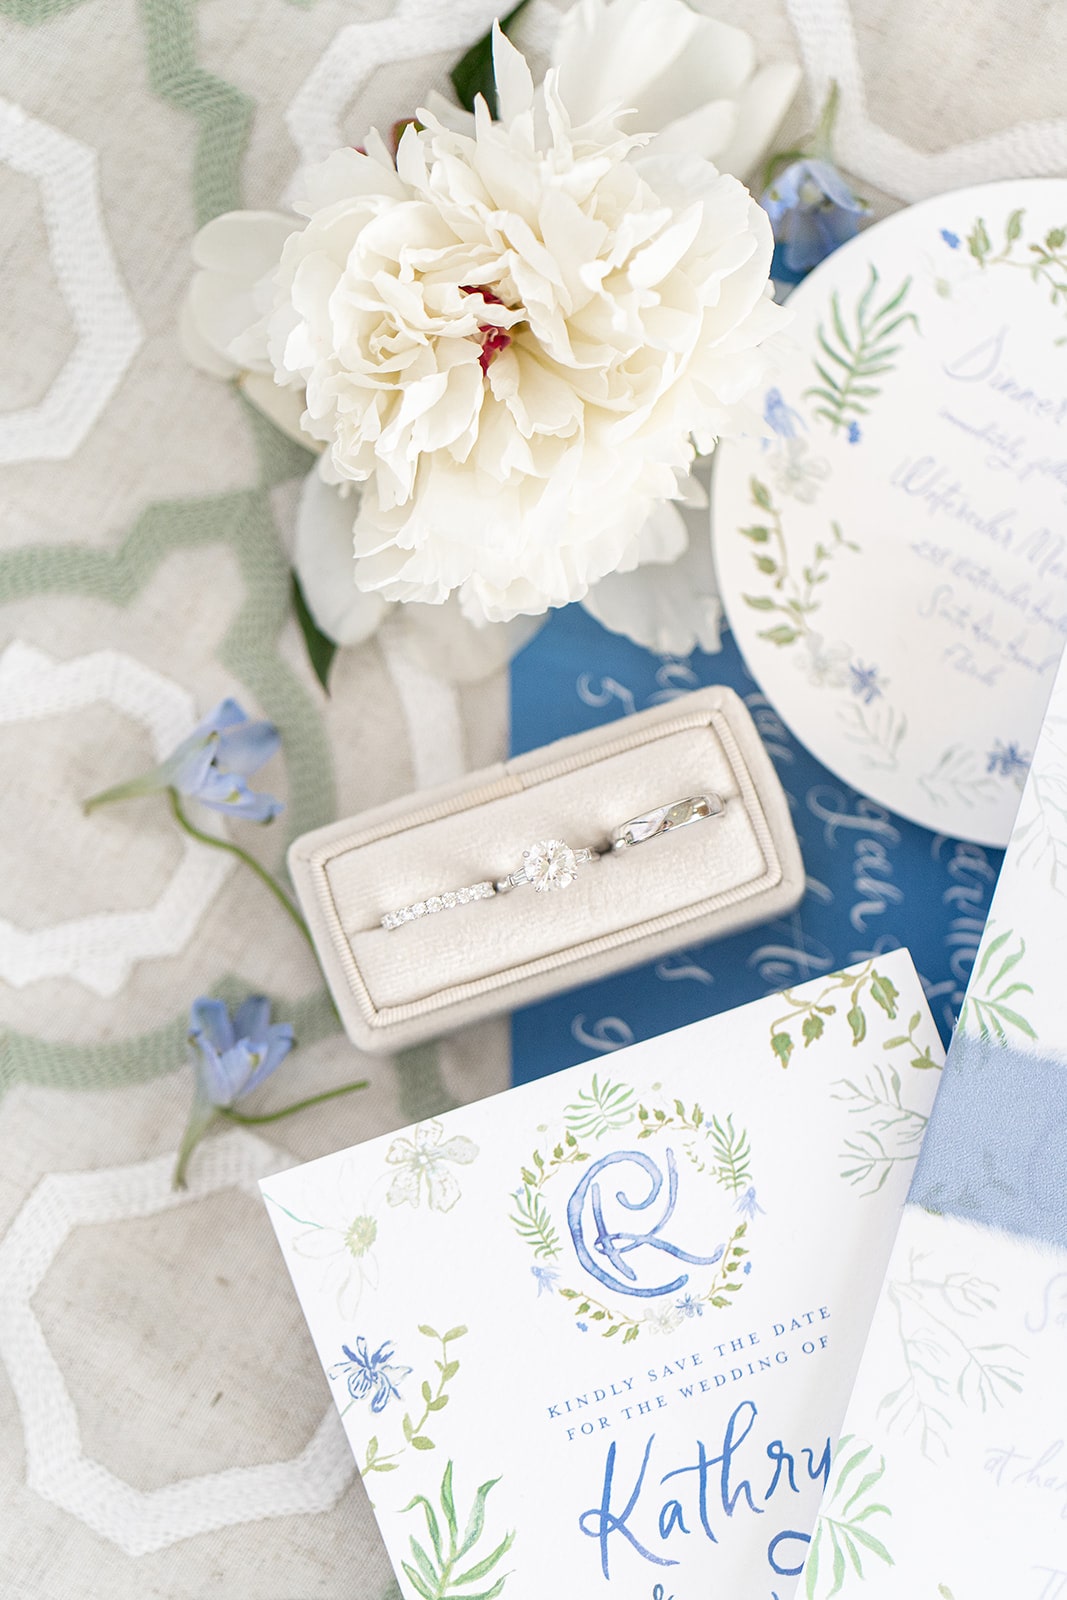 White gold wedding rings and wedding stationery